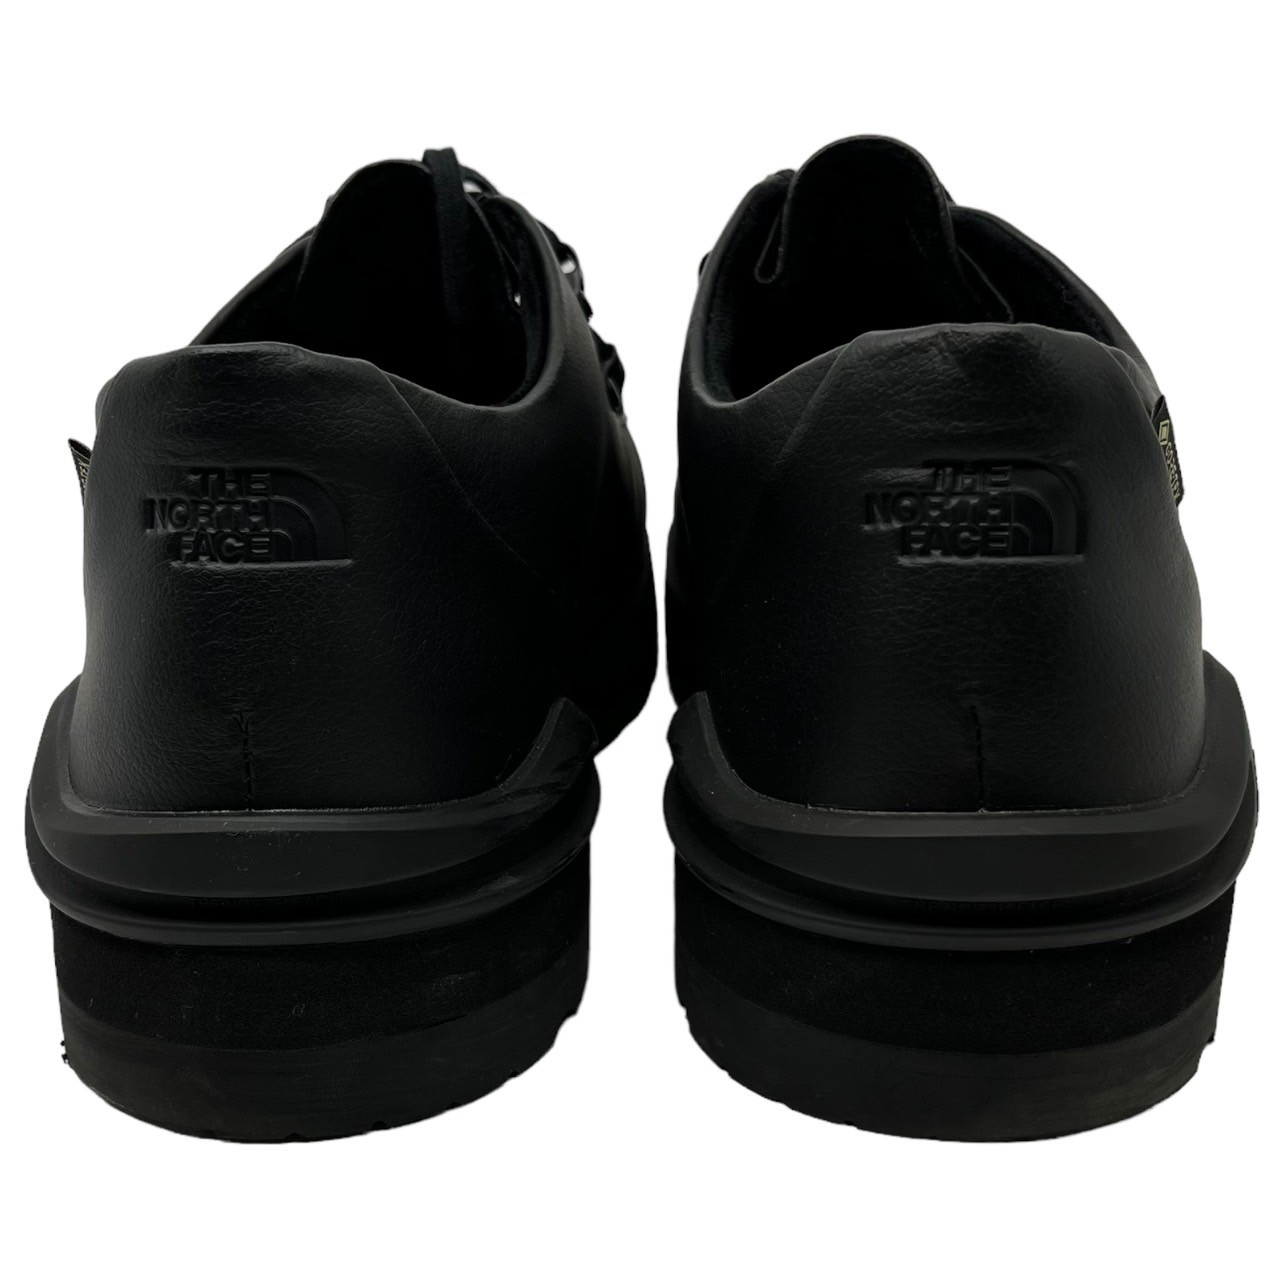 THE NORTH FACE( The North Face ) Decade GORE-TEX Moccasintike-do Gore-Tex moccasin tyrolean shoes Gore-Tex NF52261 SIZE 28cm black 